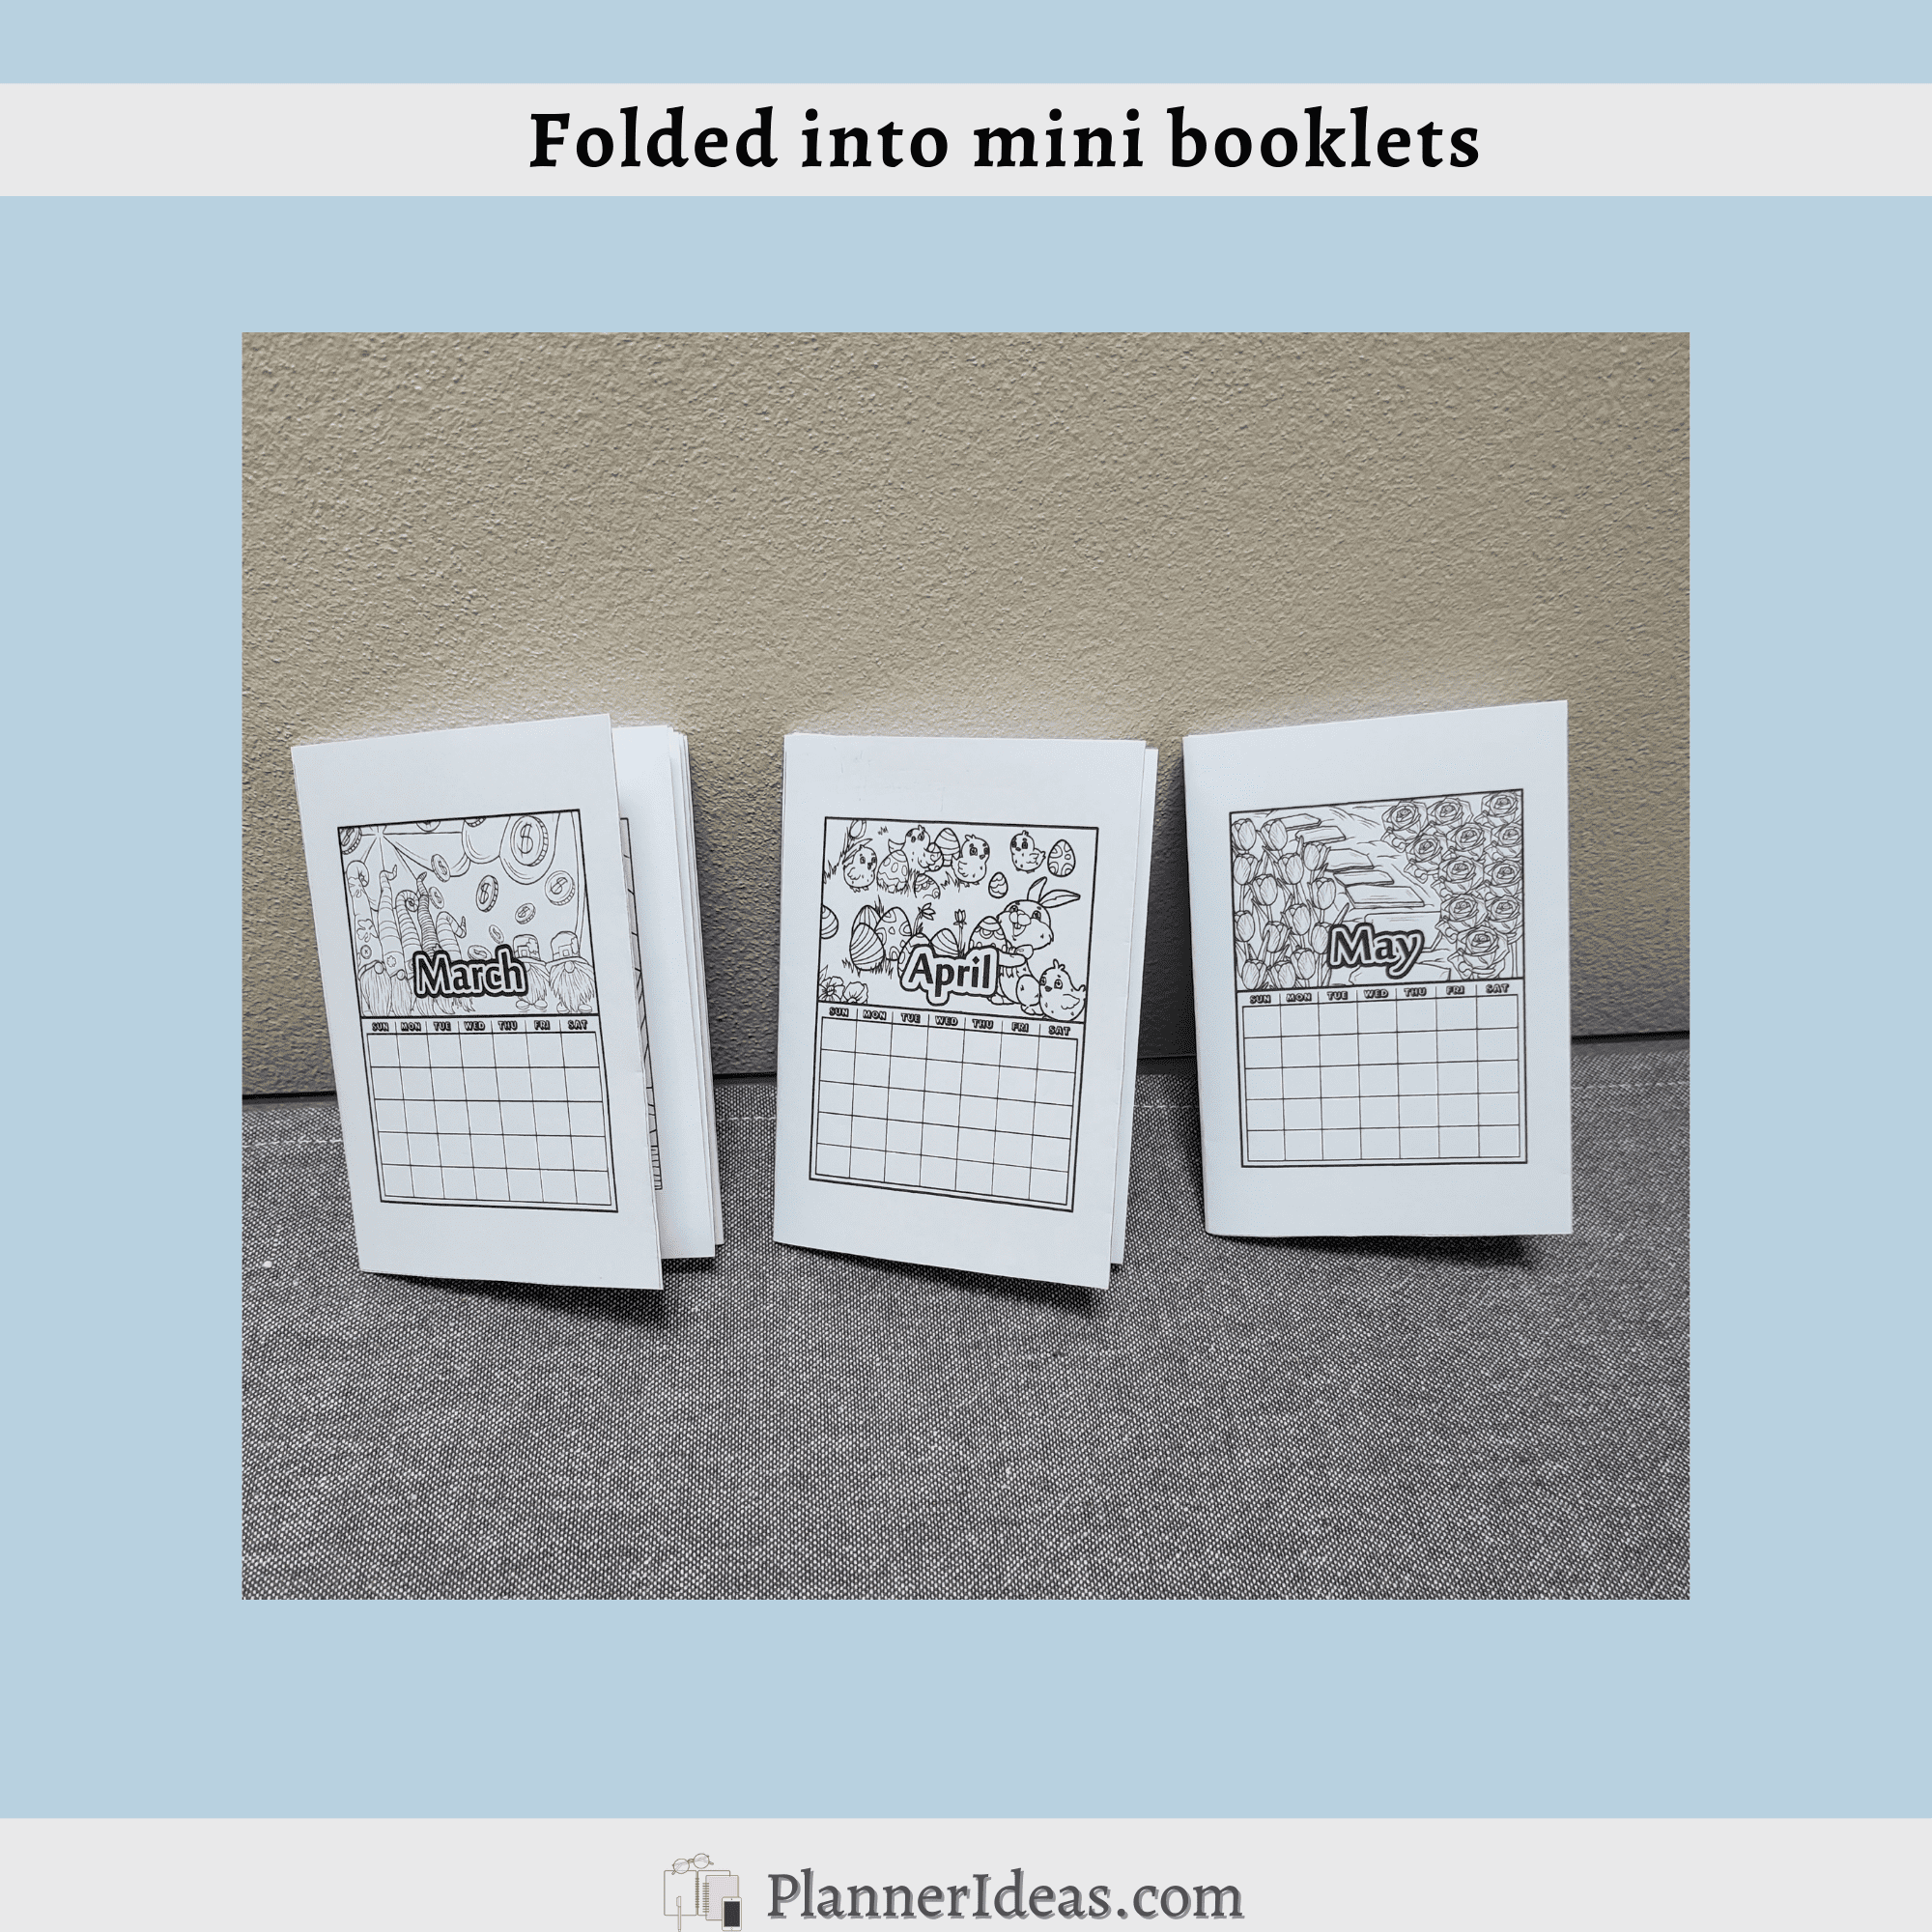 Folded booklets